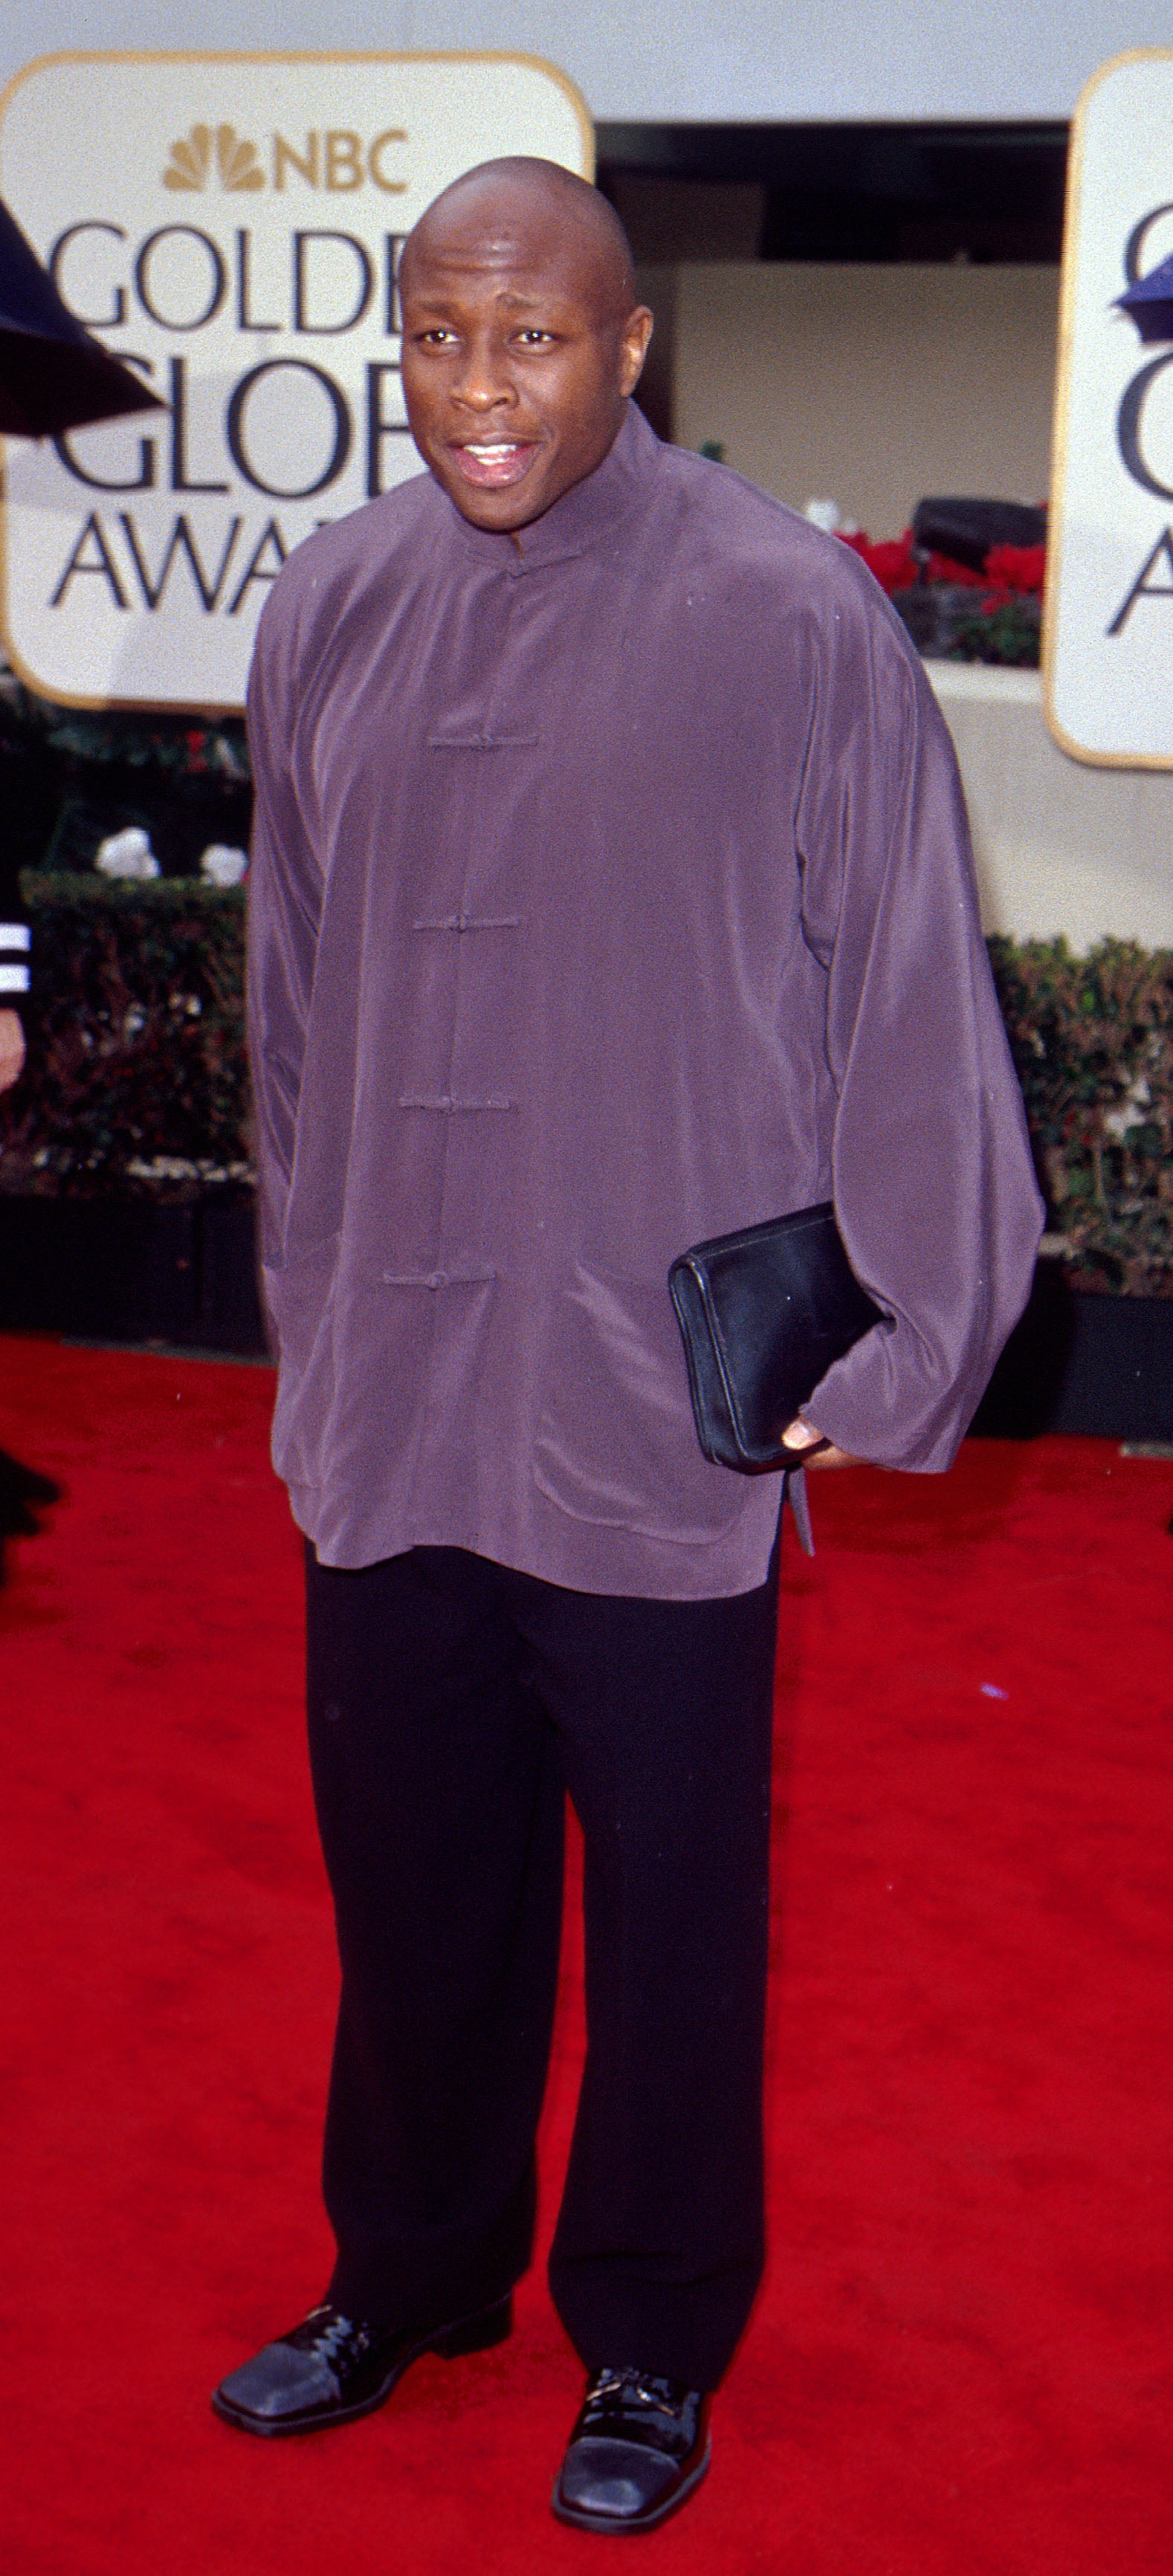 Here’s What The Golden Globes Red Carpet Looked Like 20 Years Ago